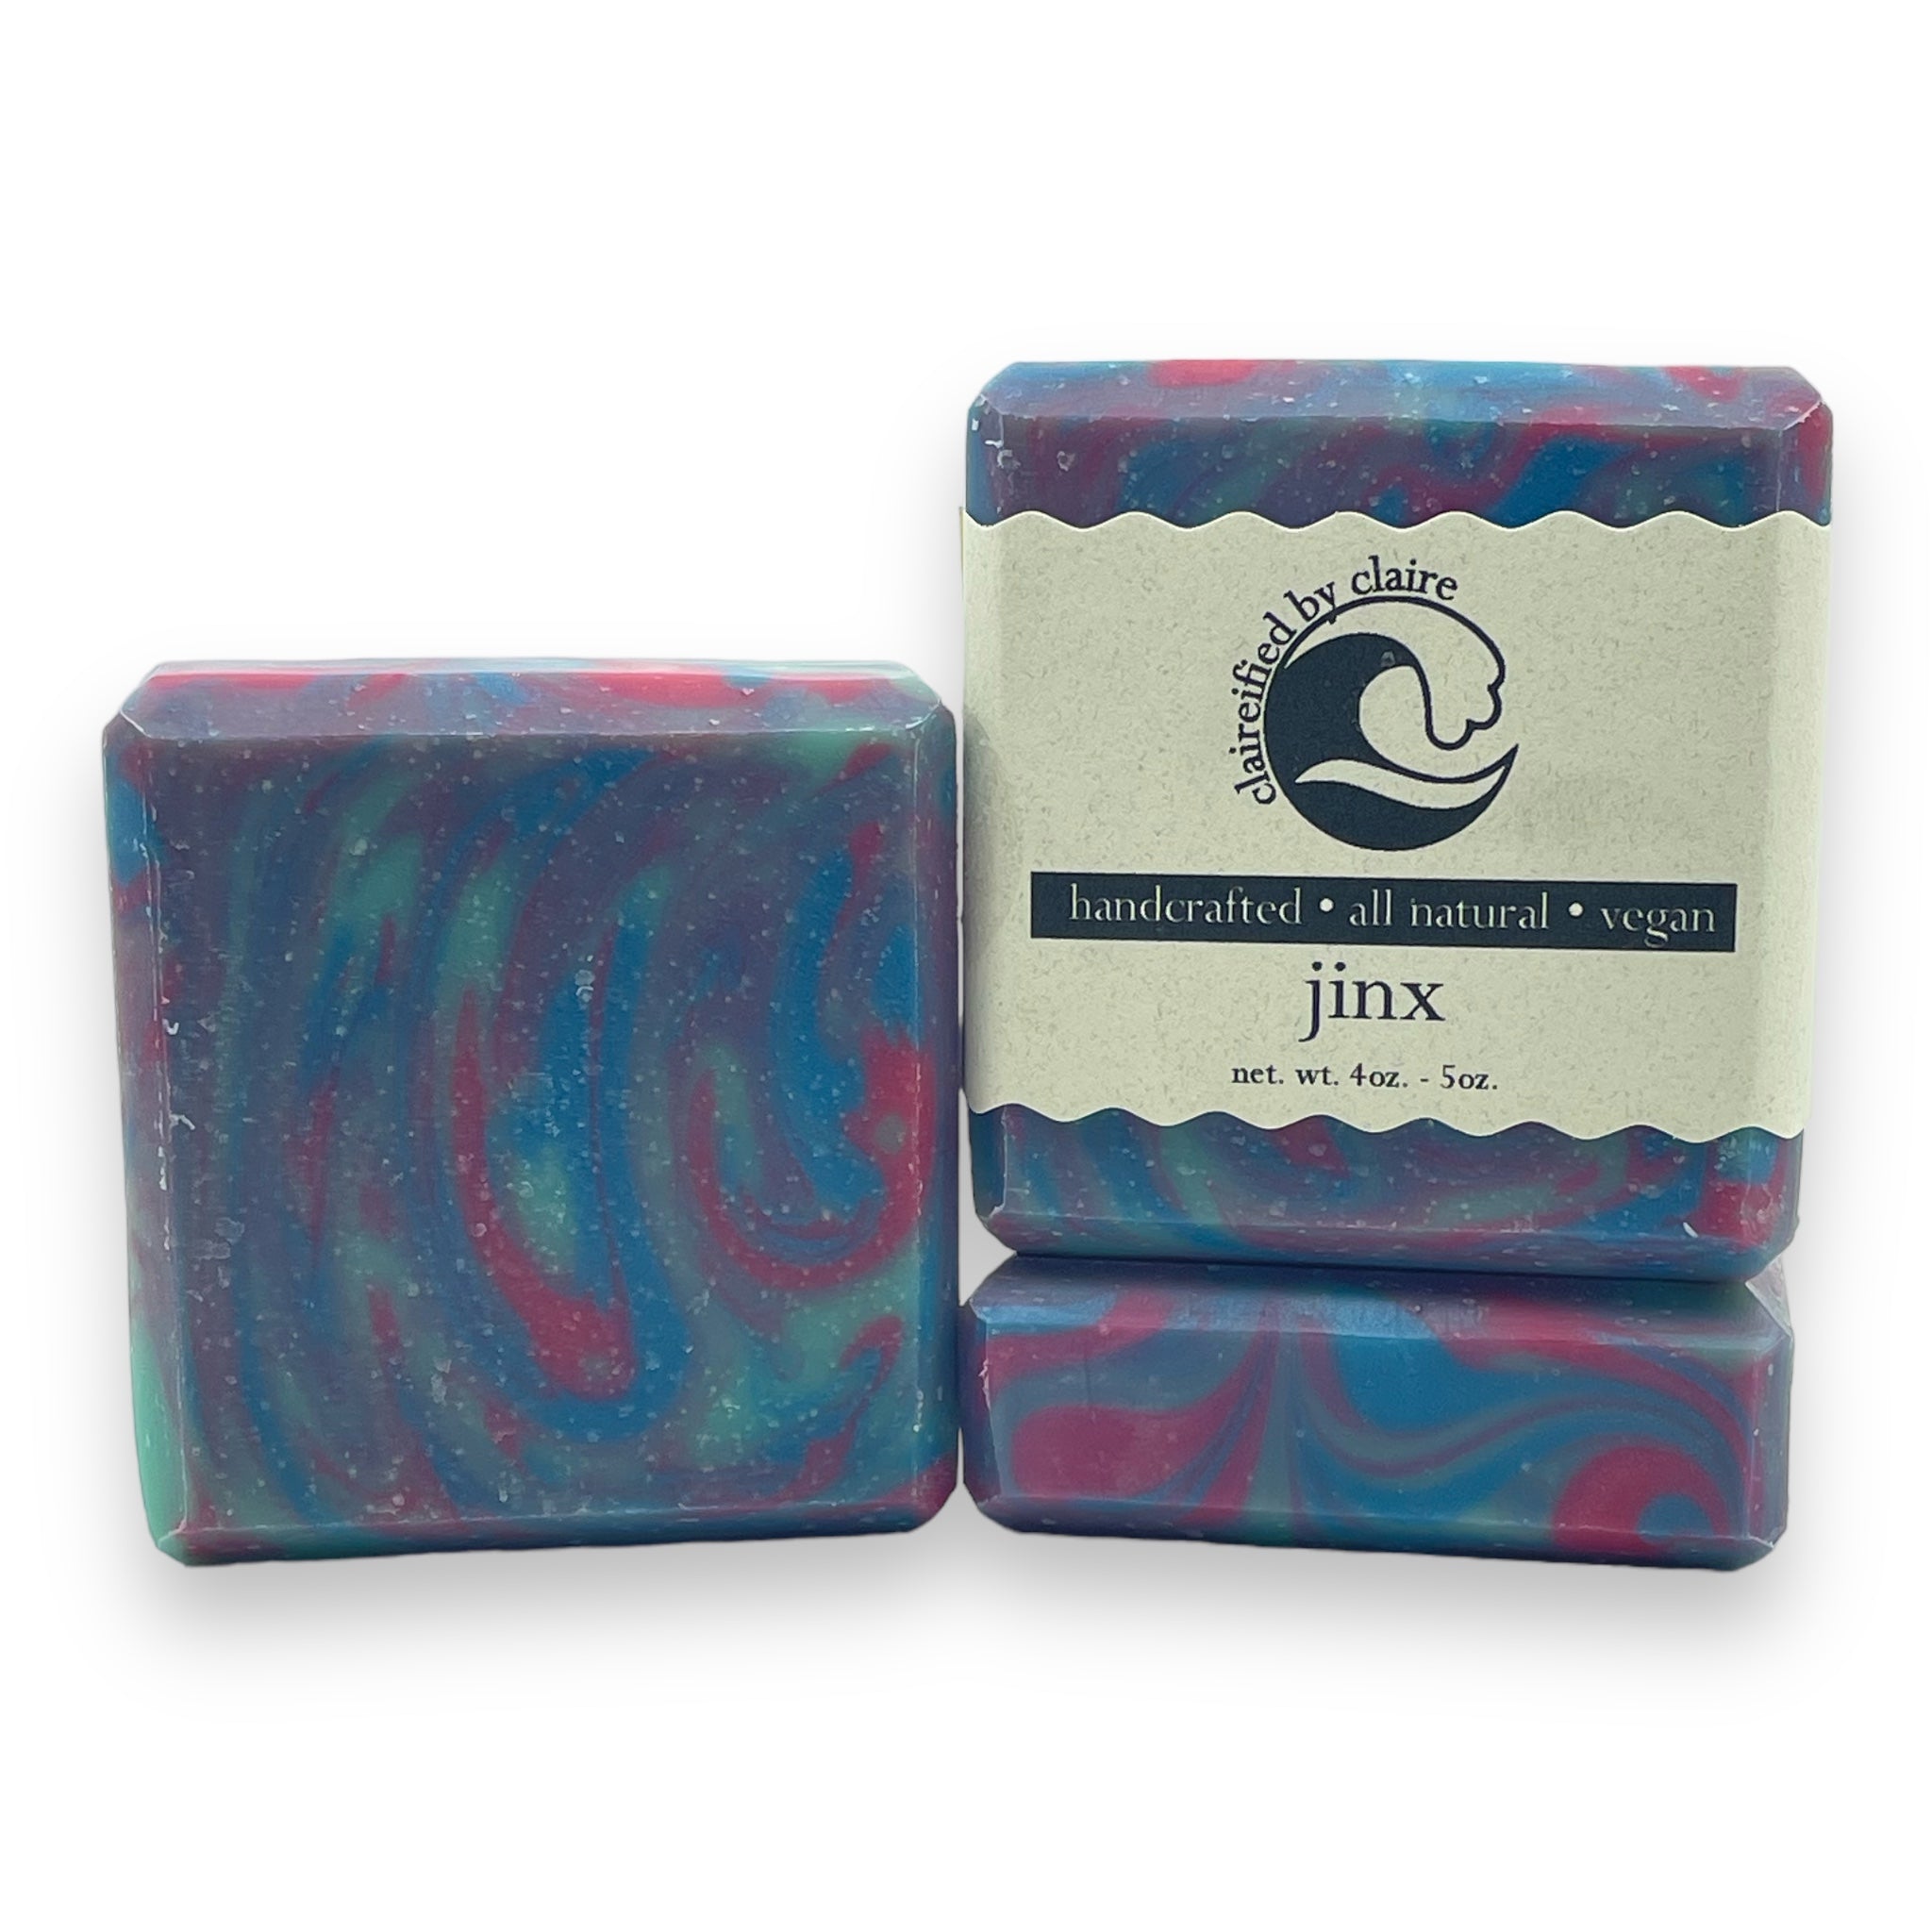 Jinx from Arcane Inspired Soap